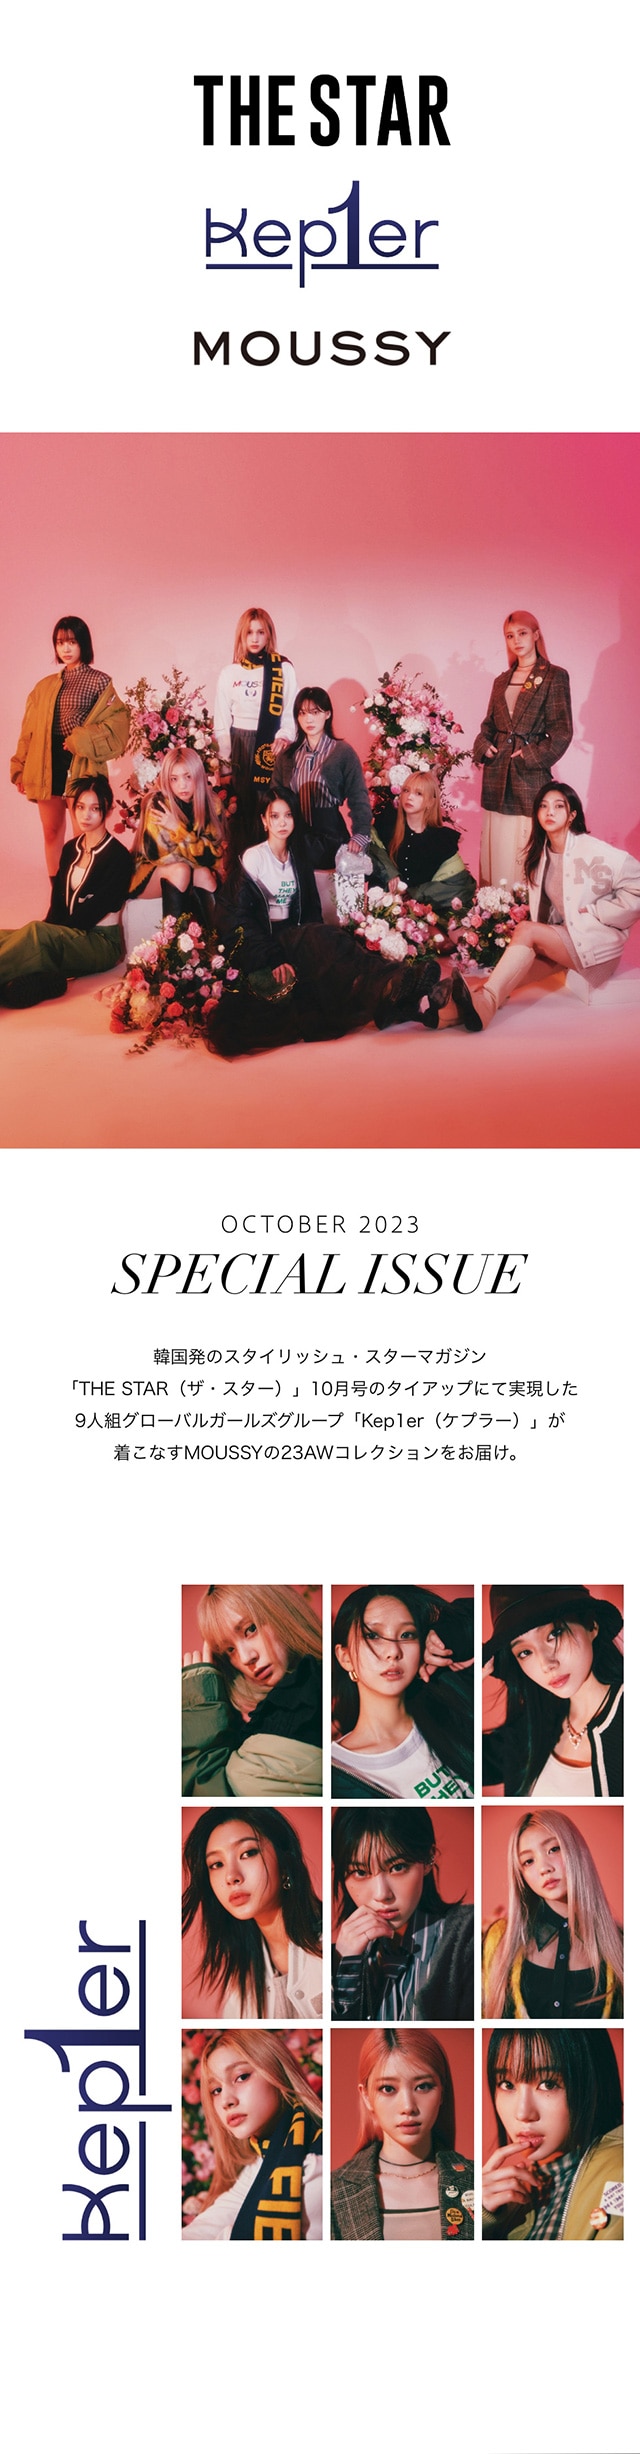 THE STAR 2023 October Special Cover : Kep1er】｜バロックジャパンリミテッド 公式通販サイト  SHEL'TTER WEB STORE(シェルターウェブストア)